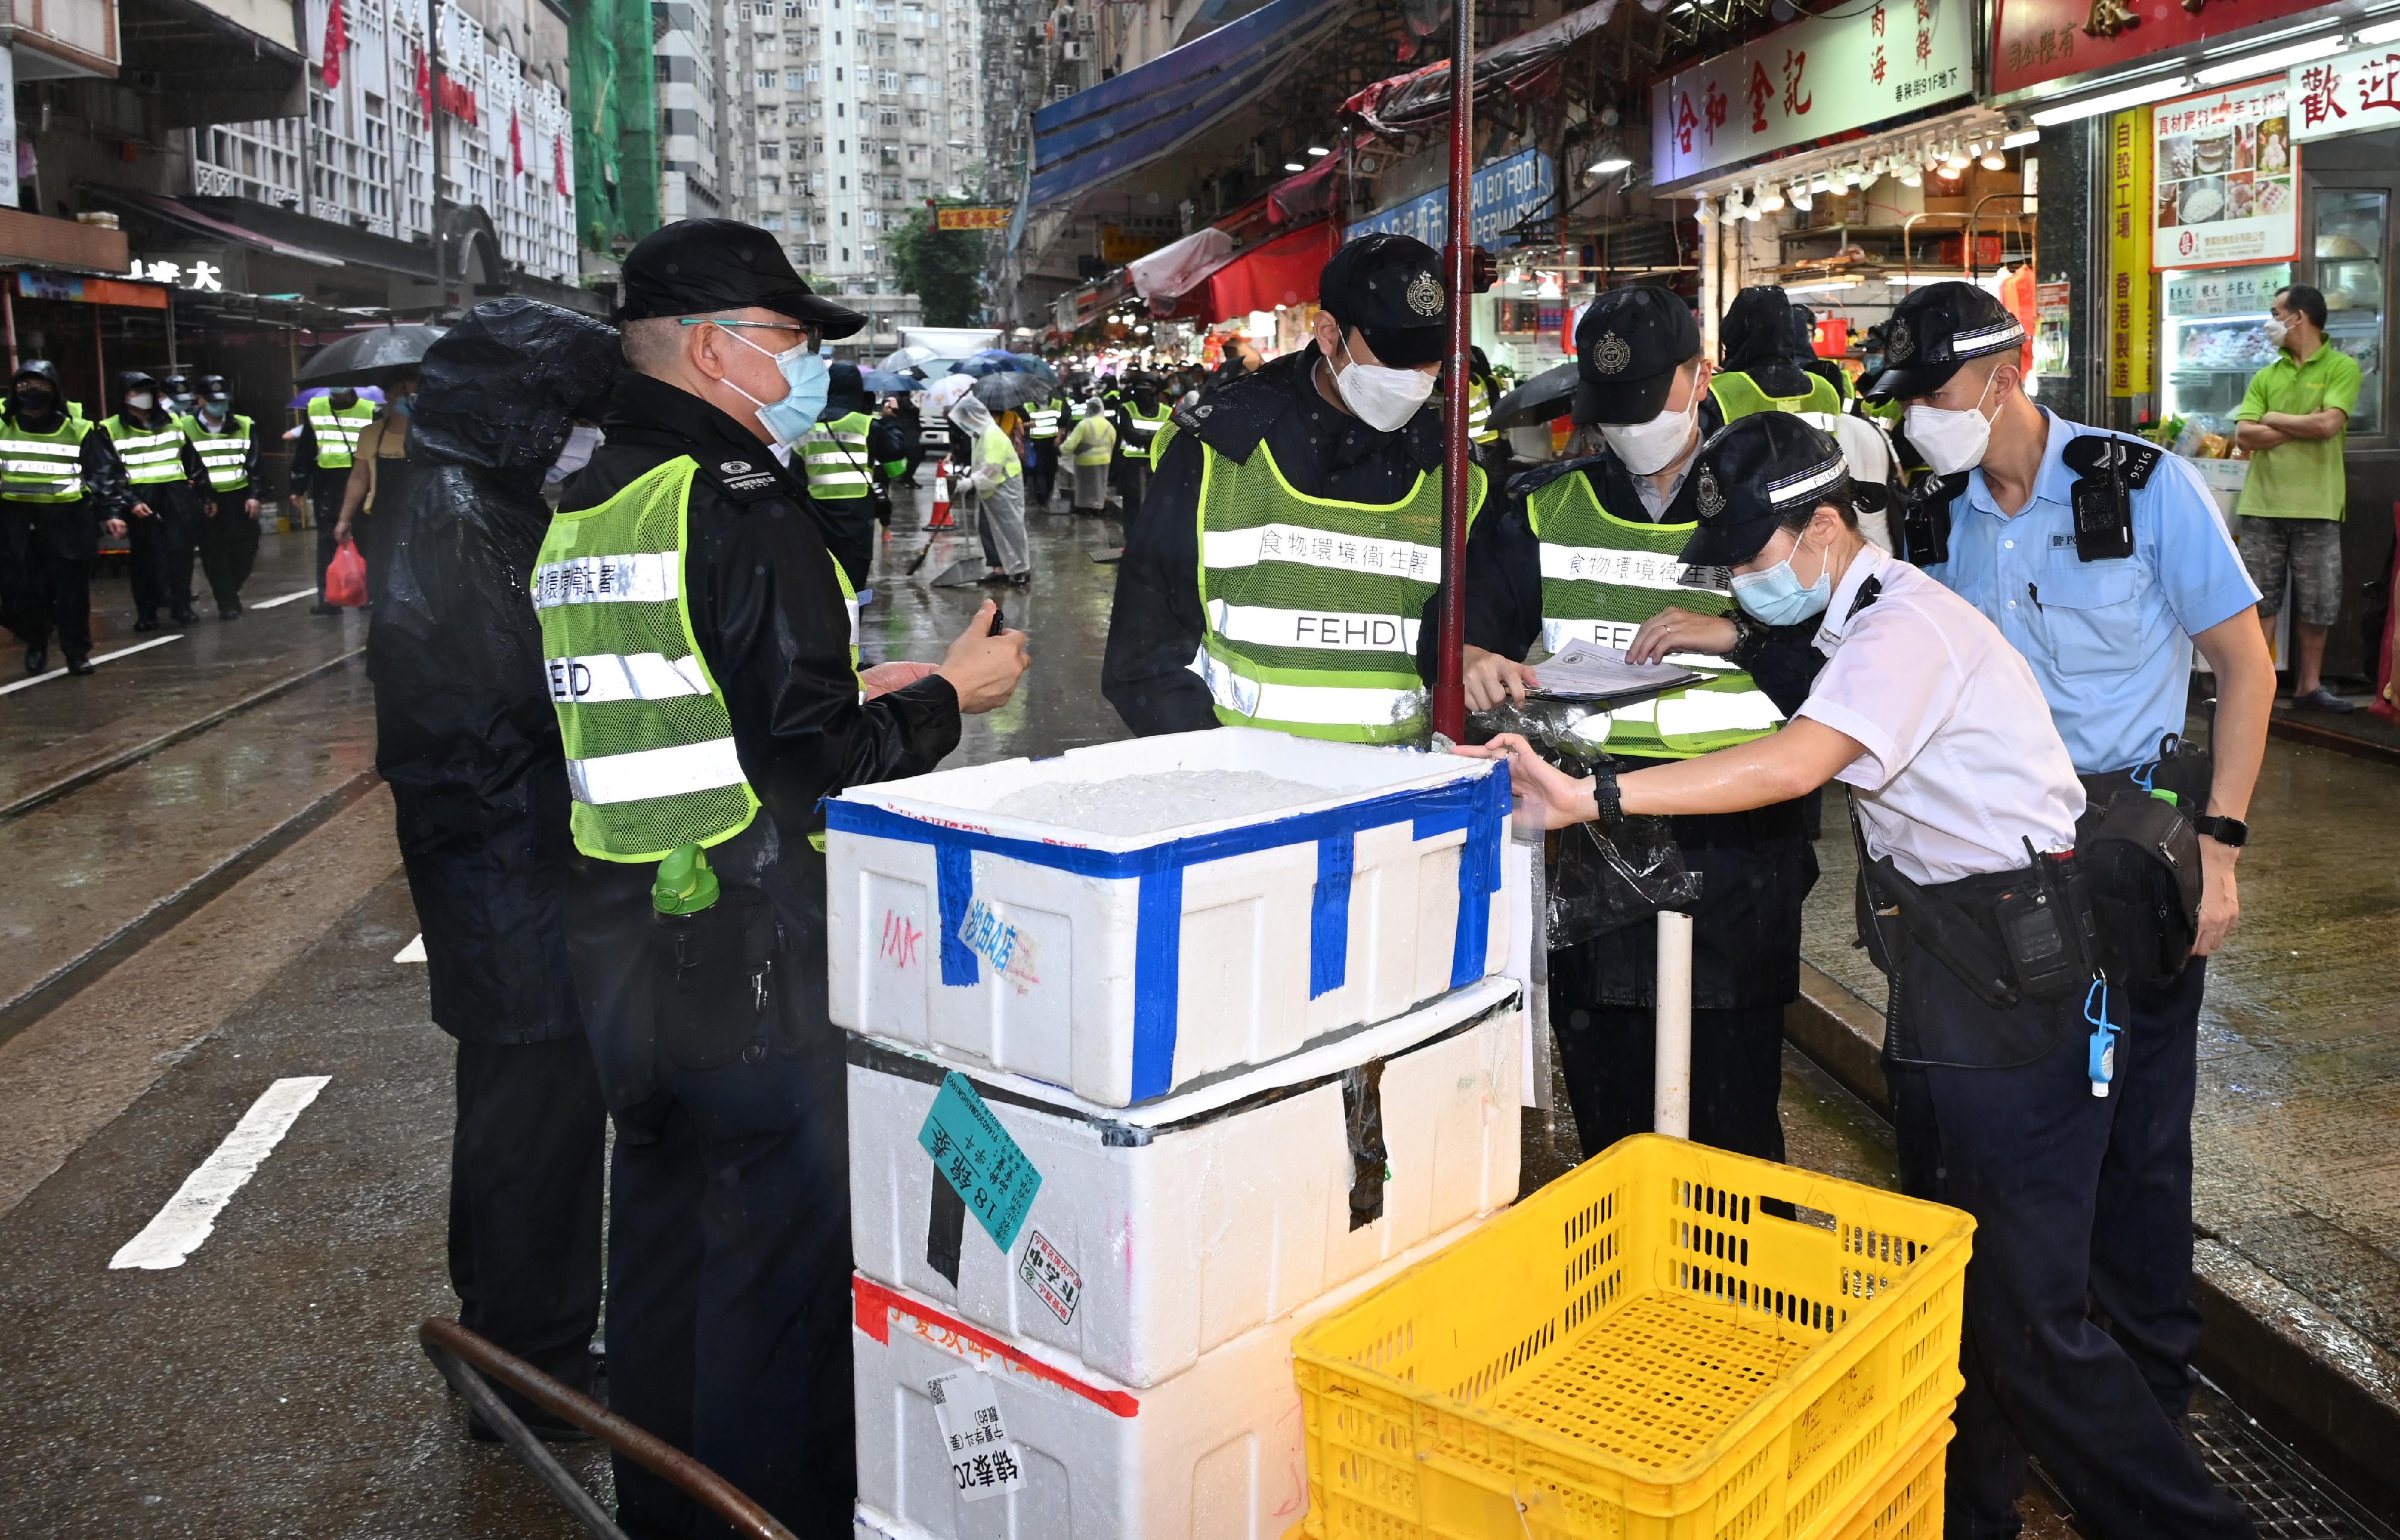 To tackle the illegal shop extension and obstruction problems, the Food and Environmental Hygiene Department (FEHD) and the Police formally launched the second phase of the trial scheme since June 7 (Tuesday) in Sham Shui Po, Yuen Long and Eastern Districts, to conduct joint operations with new enforcement strategy. Photo shows the joint operation of the FEHD and the Police in the Eastern District.